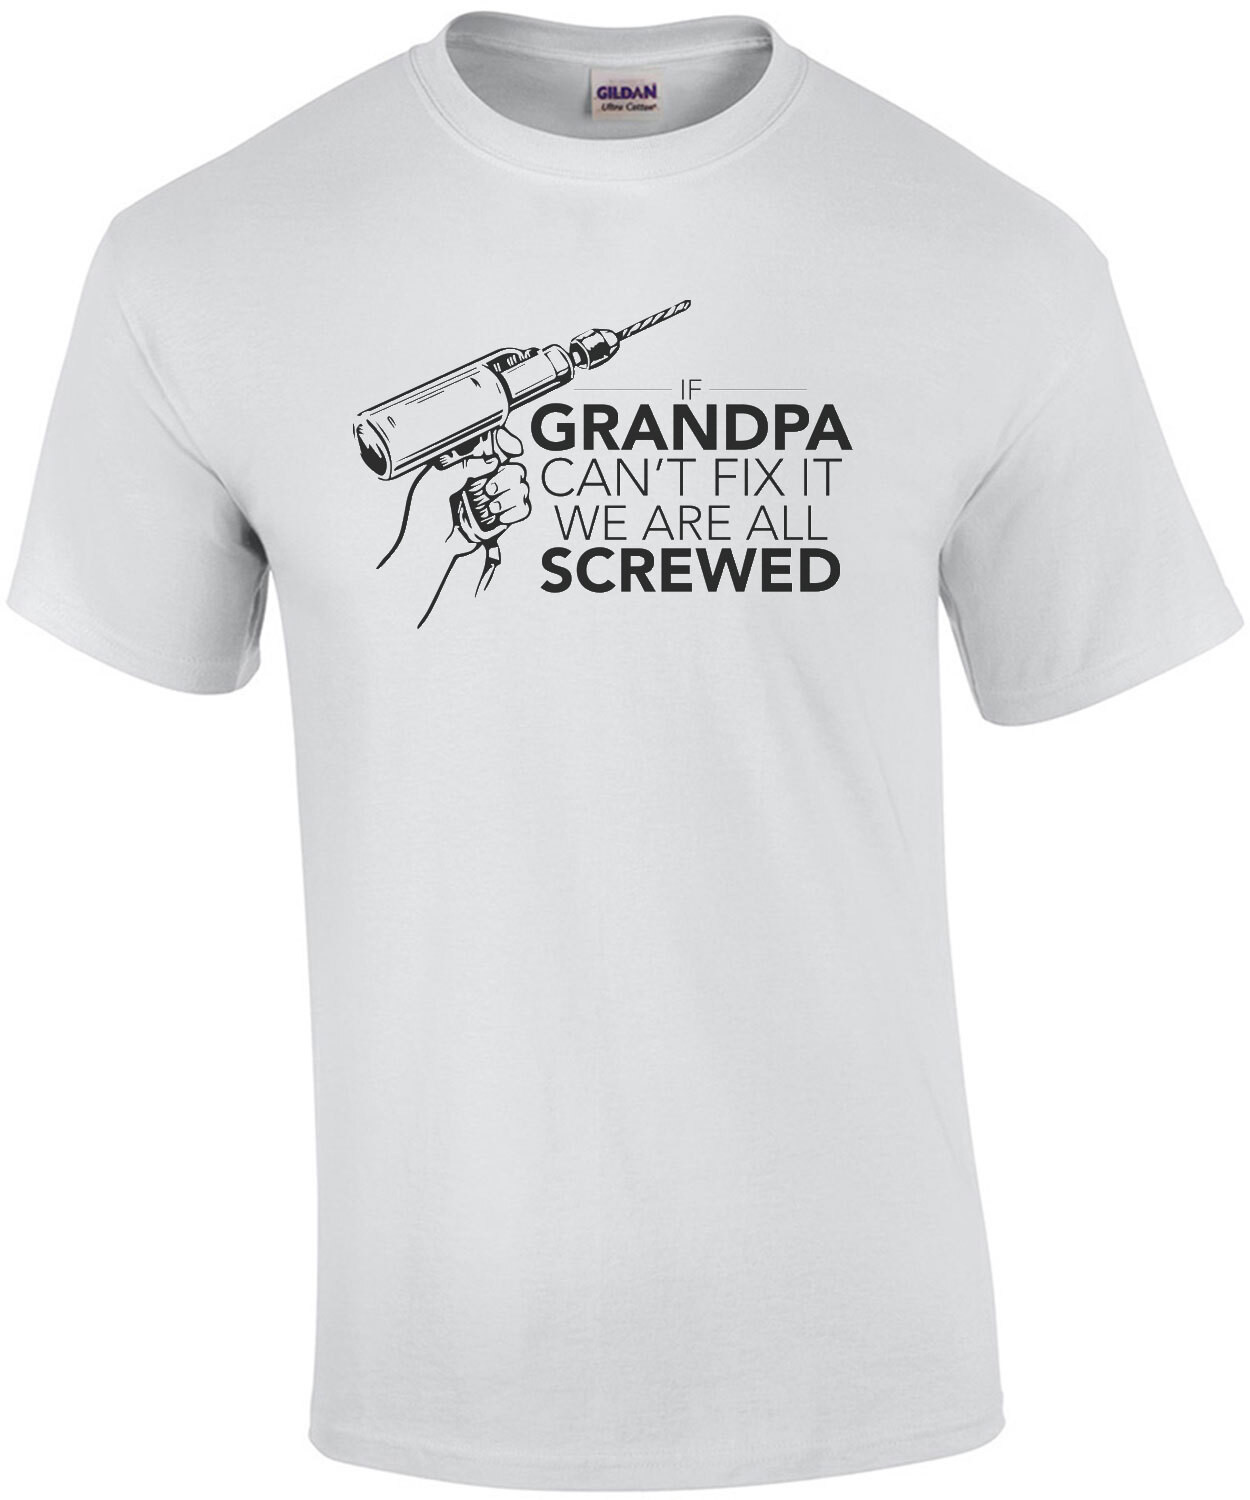 If Grandpa can't fix it we are all screwed. funny t-shirt